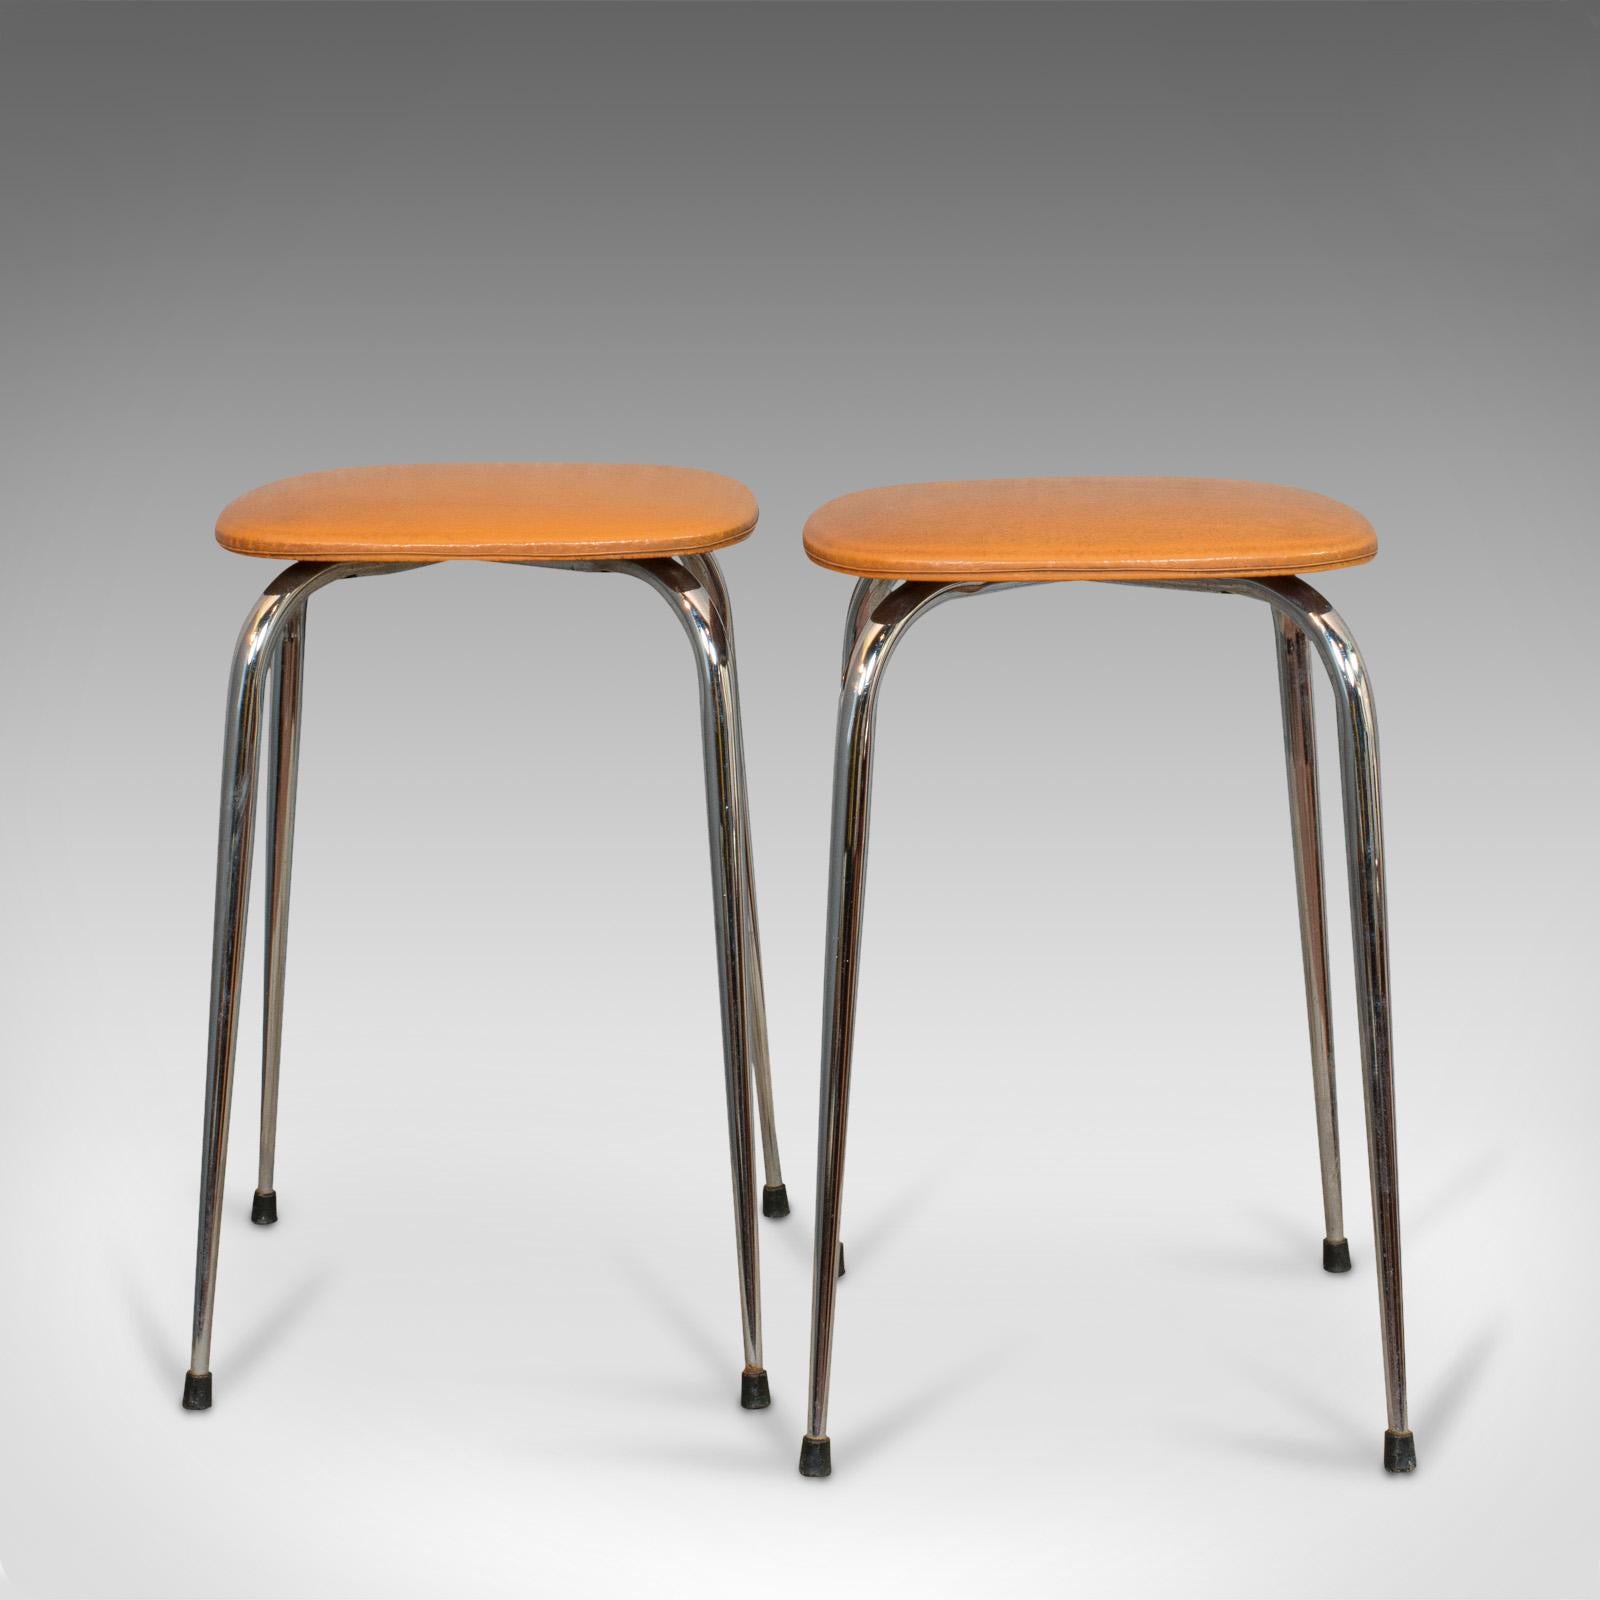 Pair of Vintage Lounge Stools, French, Leatherette, 1960s Stool, 20th Century In Good Condition For Sale In Hele, Devon, GB